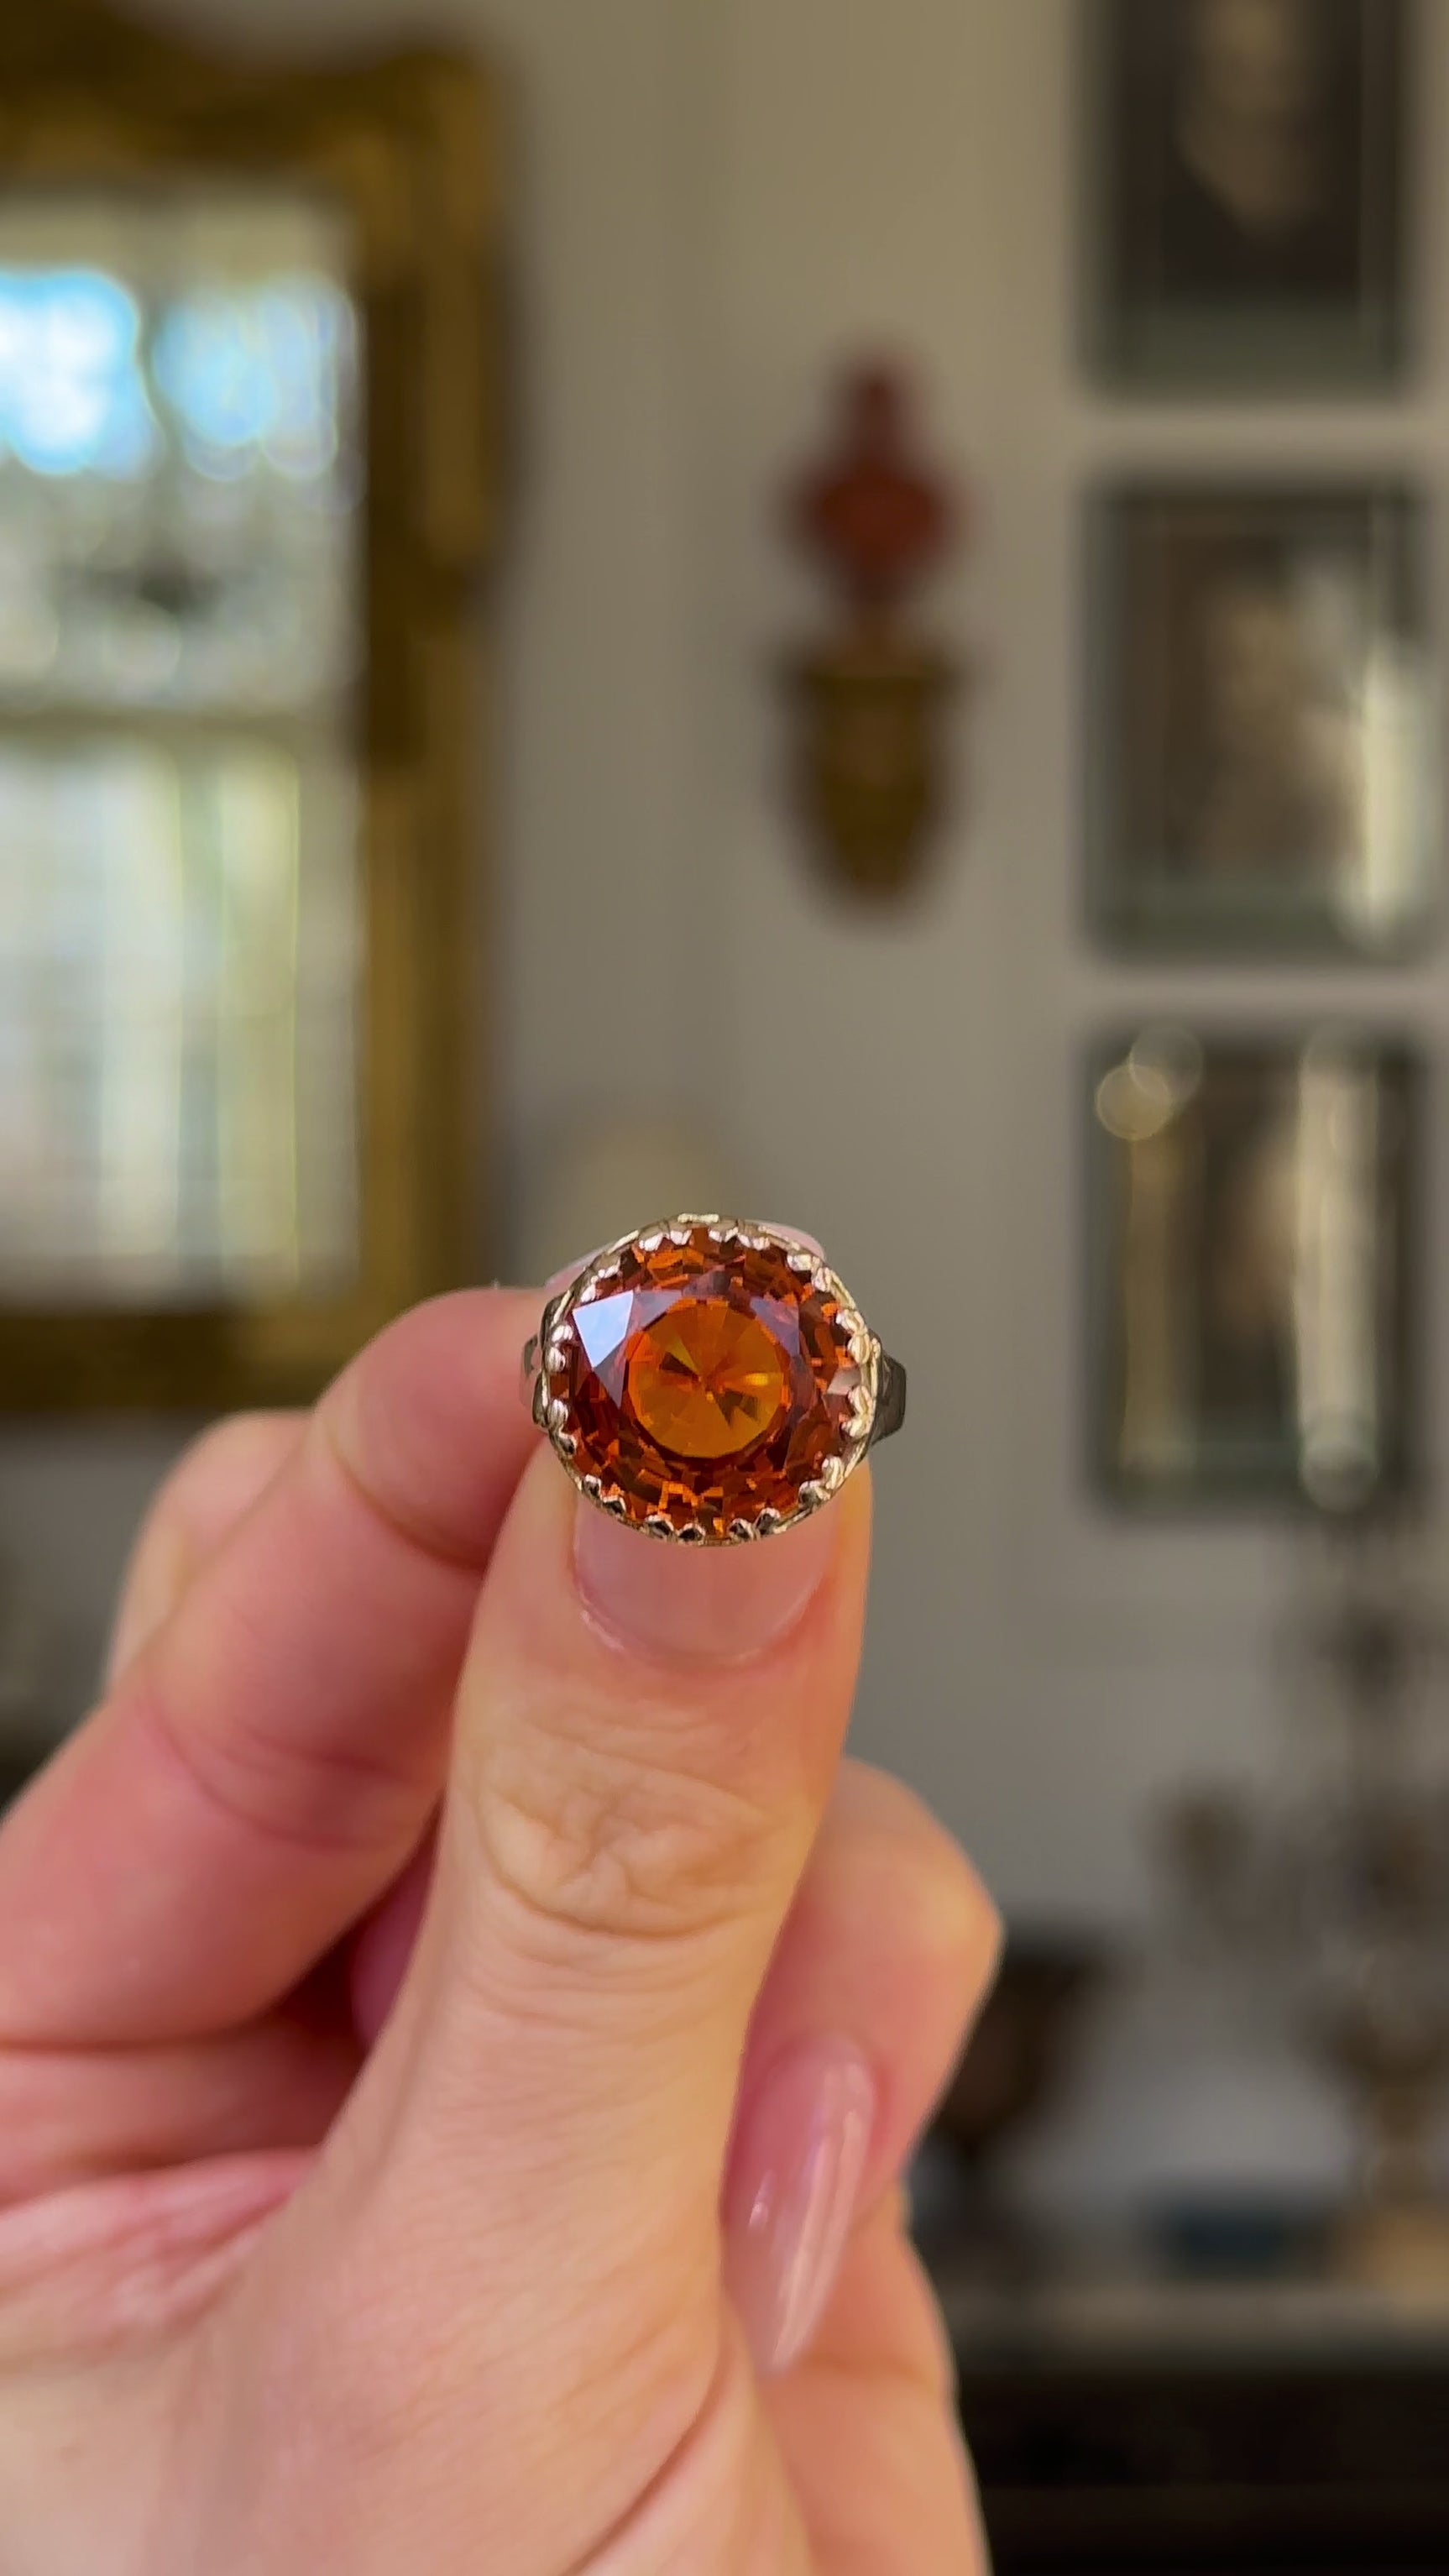 Vintage, 1980s Citrine Cocktail Ring, 18ct Yellow Gold held in fingers and rotated to give perspective.